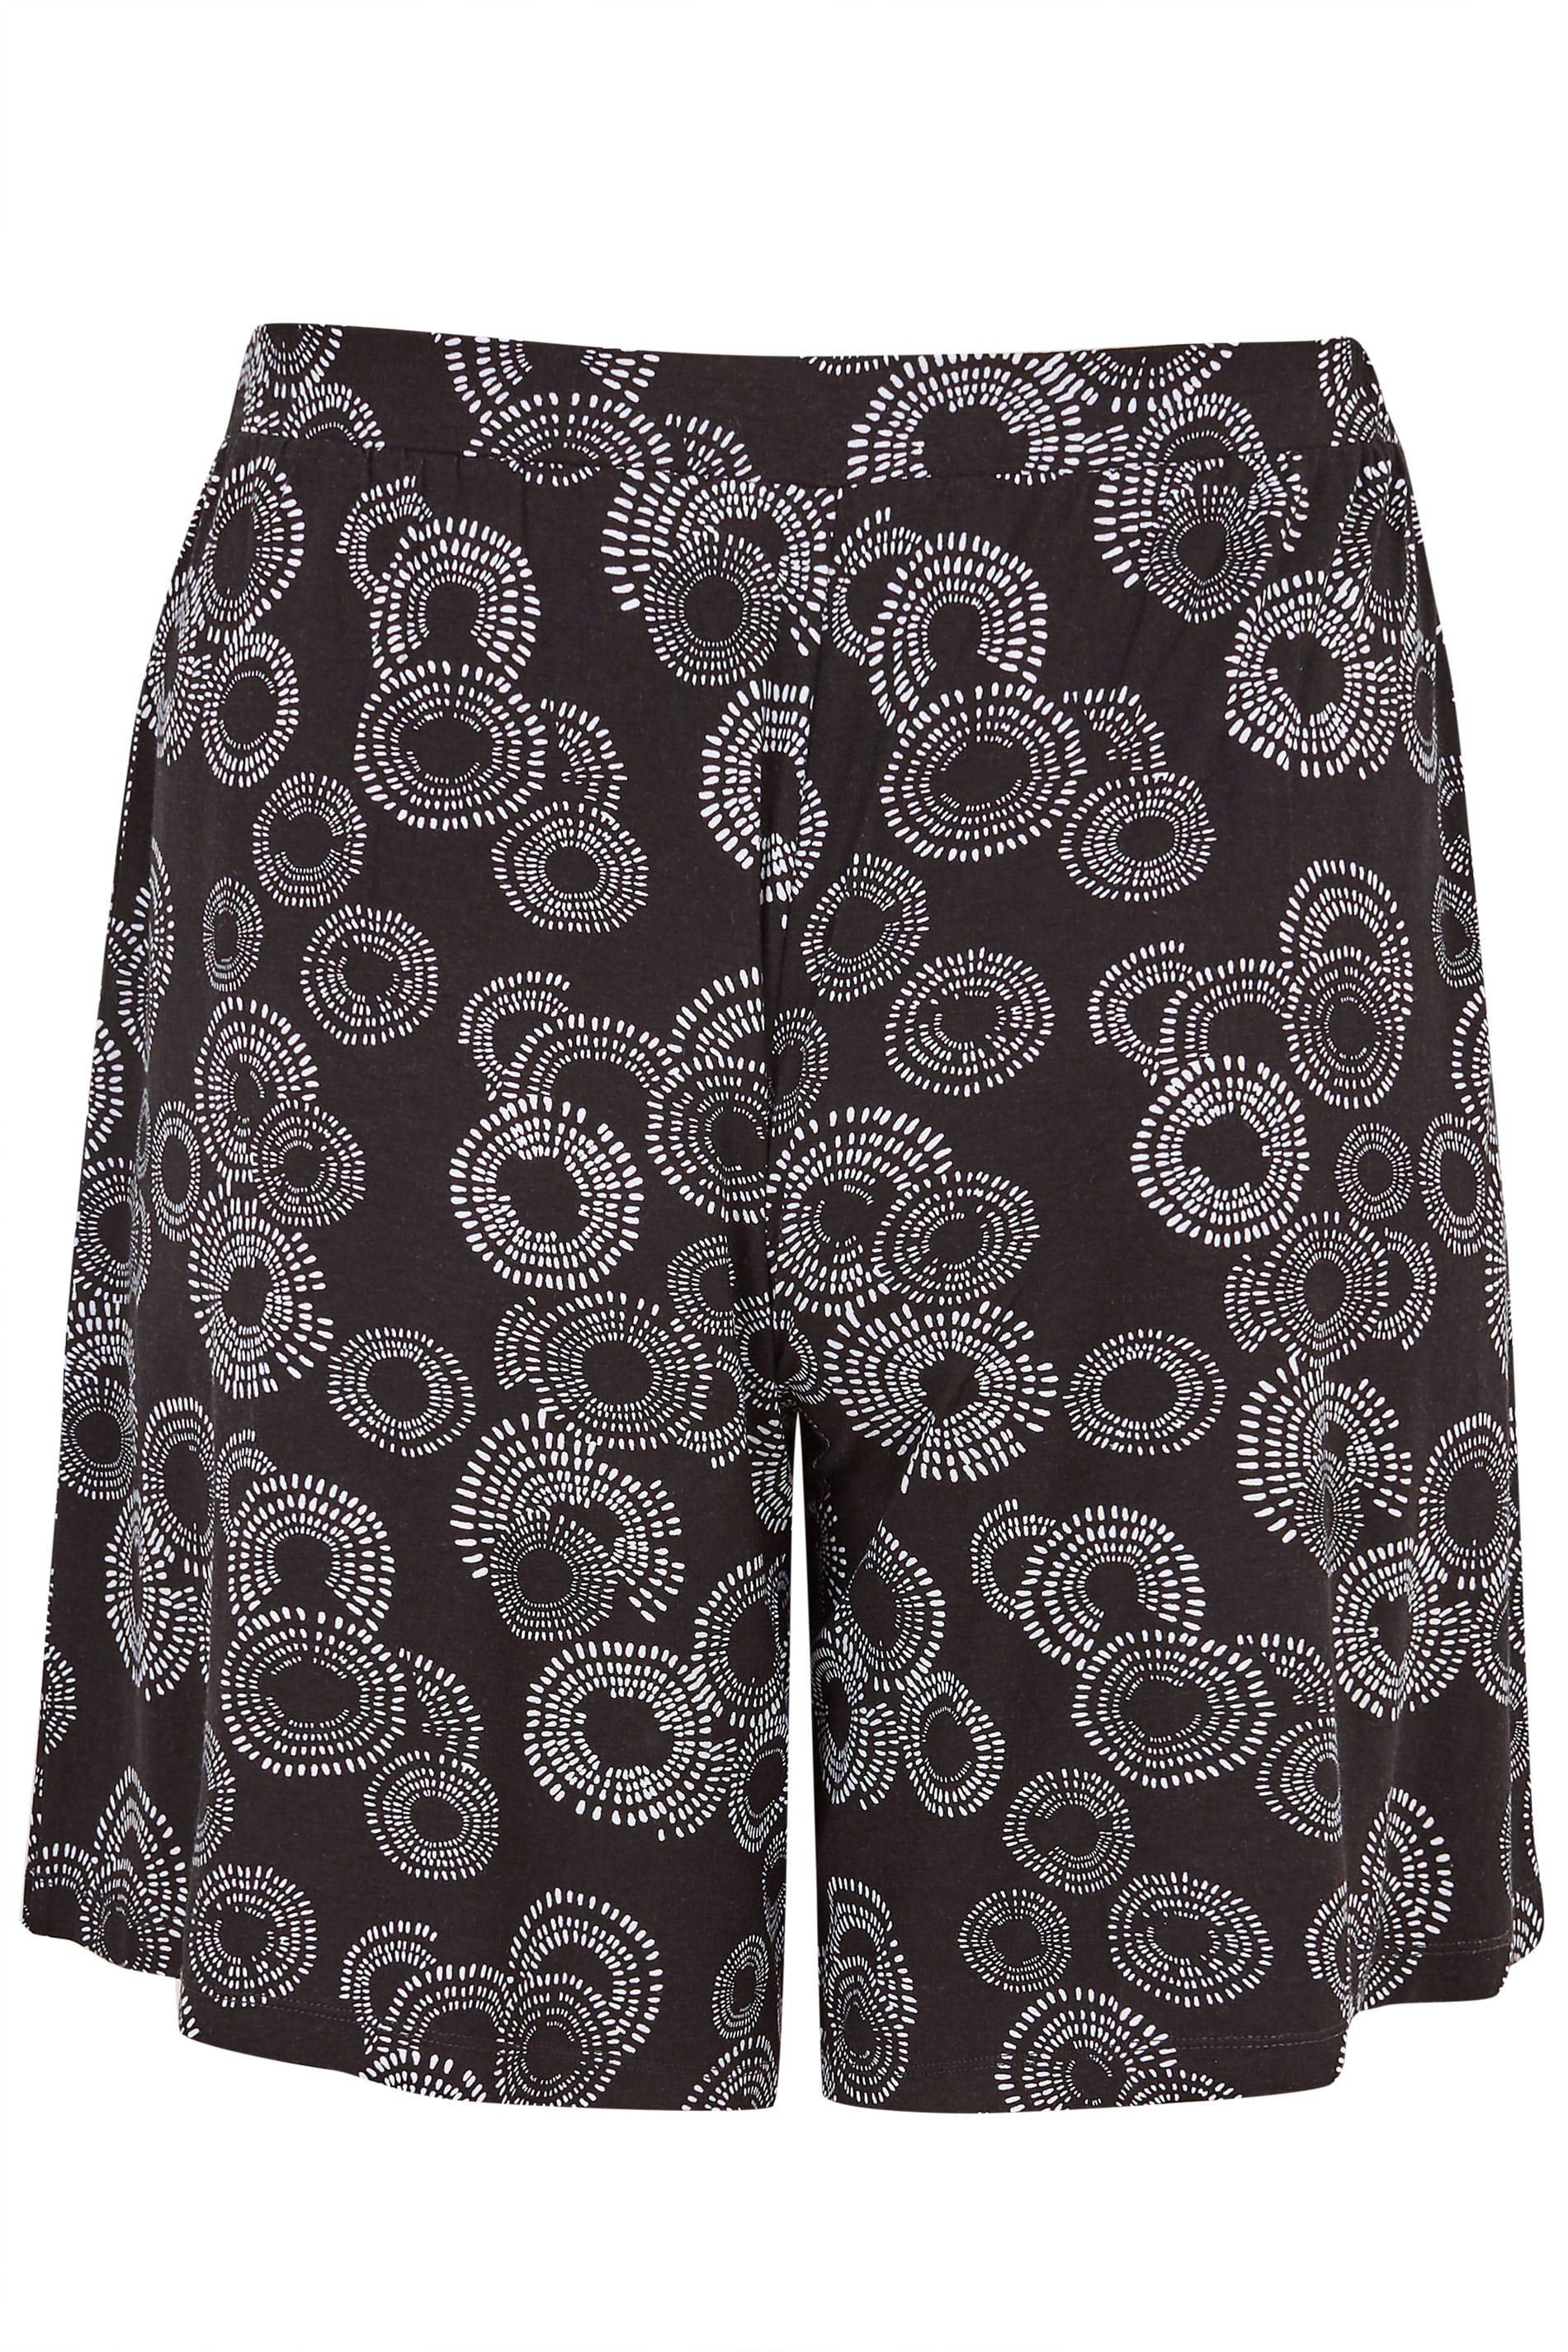 Black Circular Print Jersey Shorts | Sizes 16 to 36 | Yours Clothing